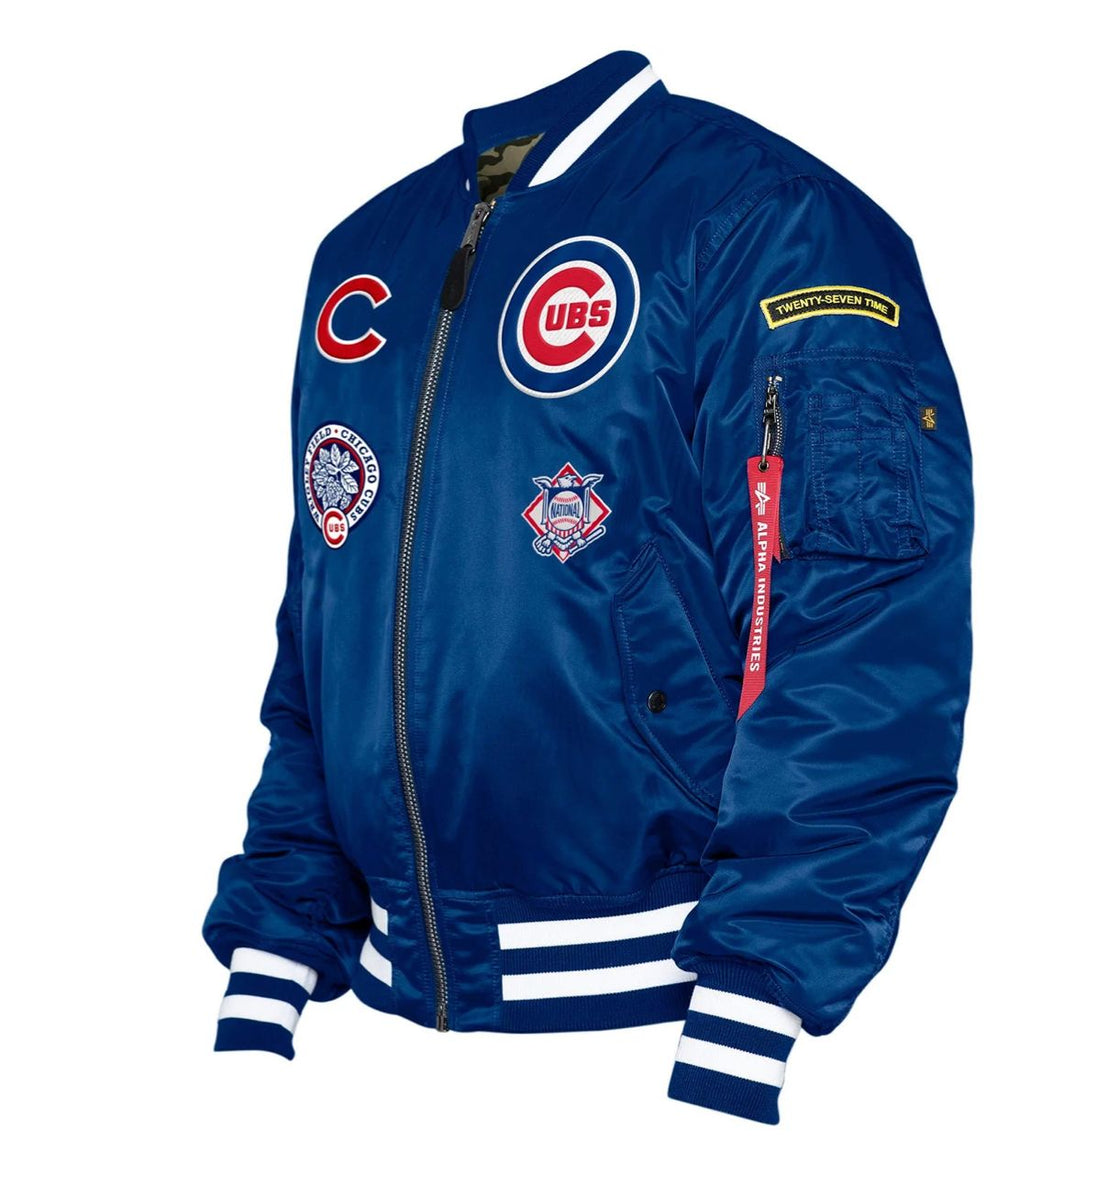 Chicago Cubs x Alpha Industries® MA-1 Squadron Bomber Jacket by New Era®